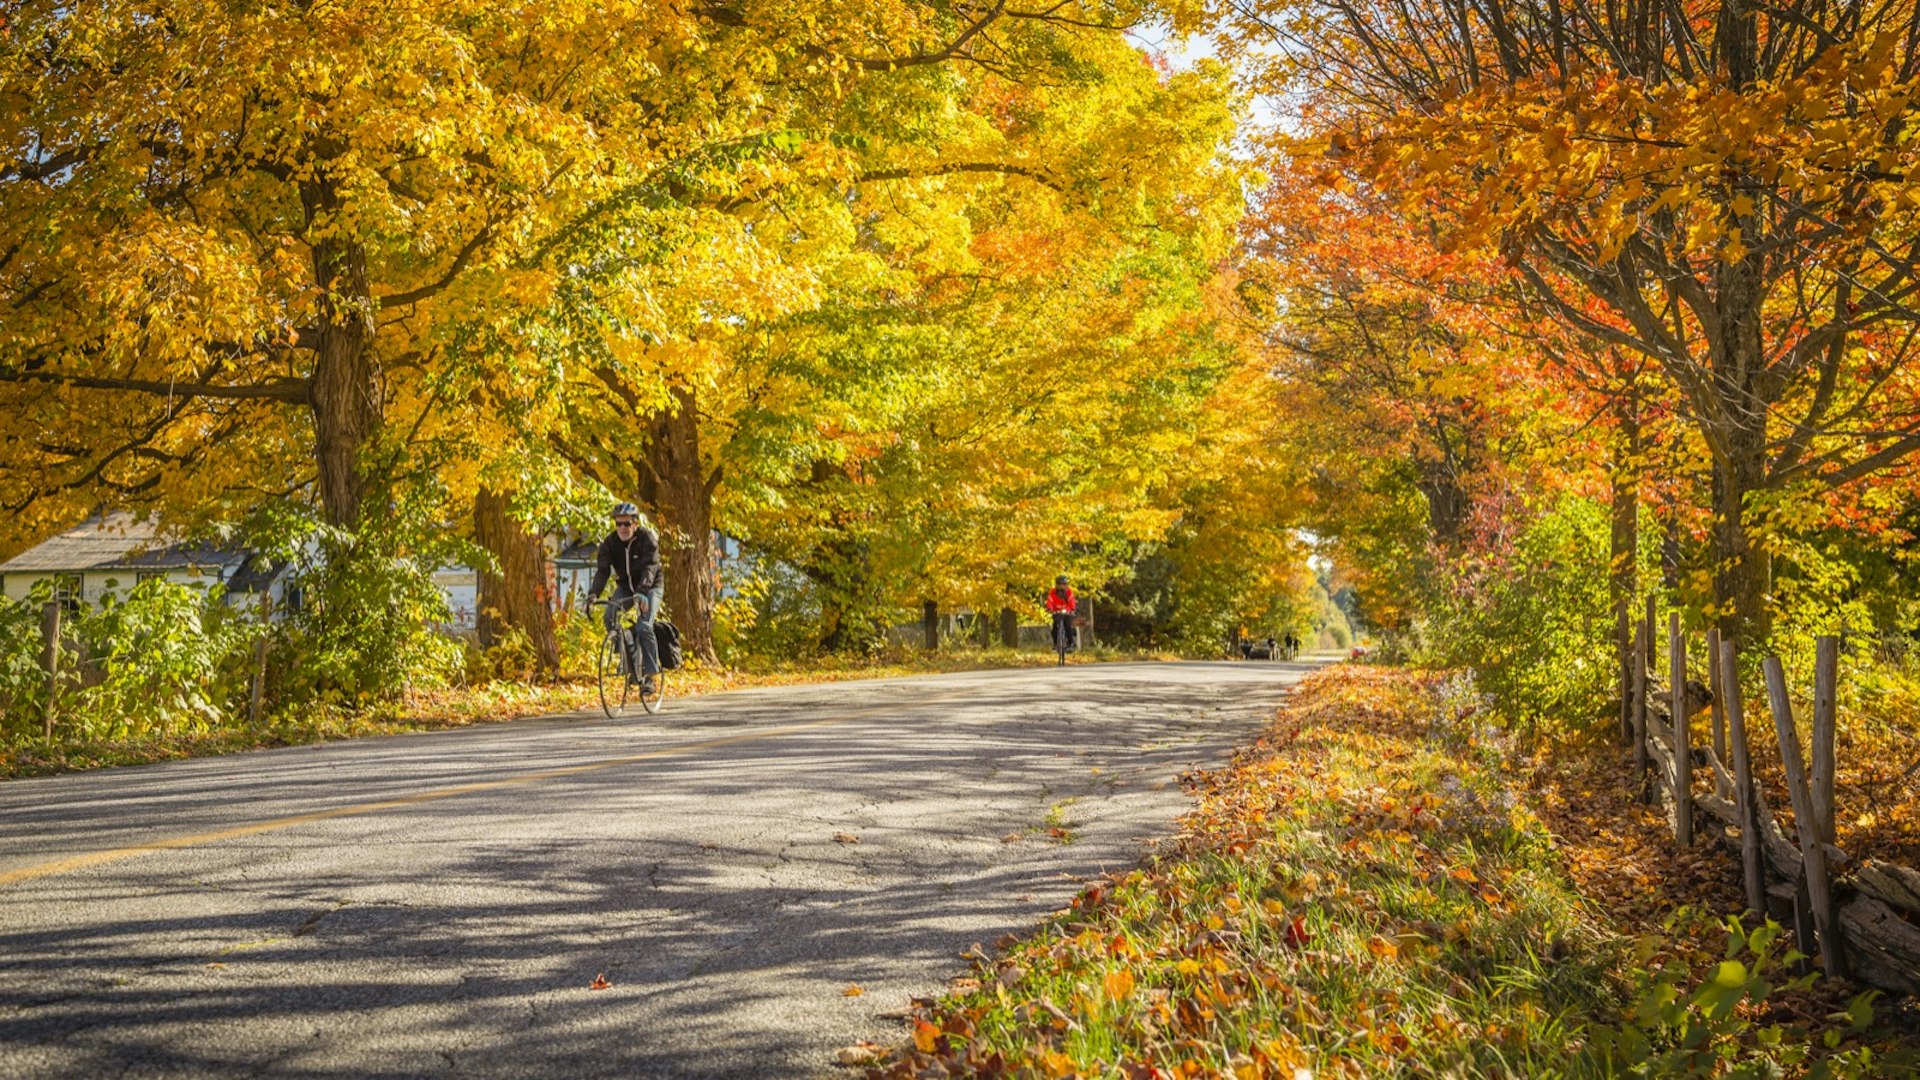 Cyclists in the beautiful autumn scenery